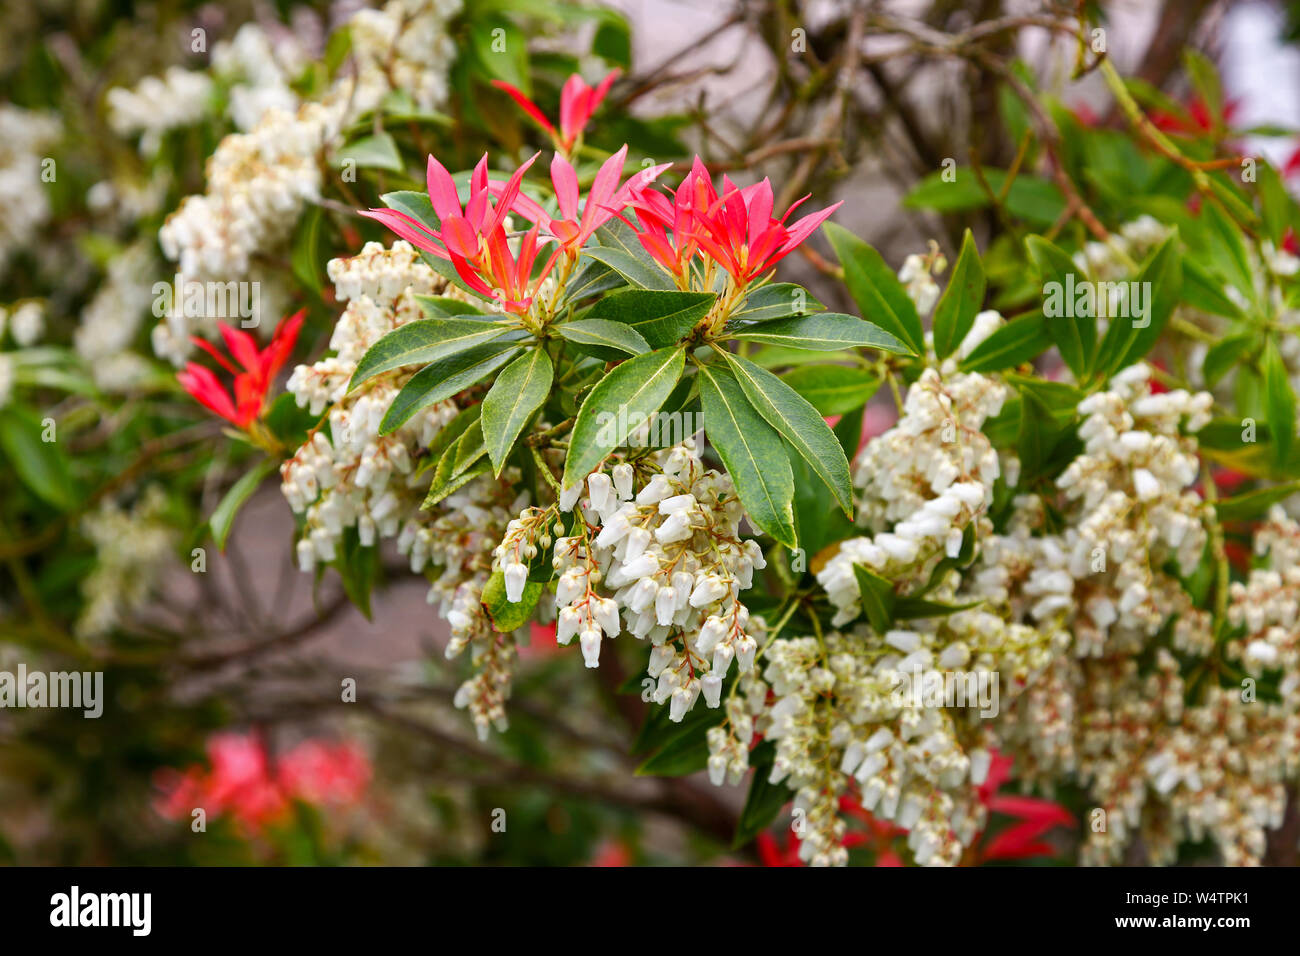 The white flower racemes and red new growth shoots of  young leaves of Pieris japonica 'Forest Flame' flowering shrub Stock Photo